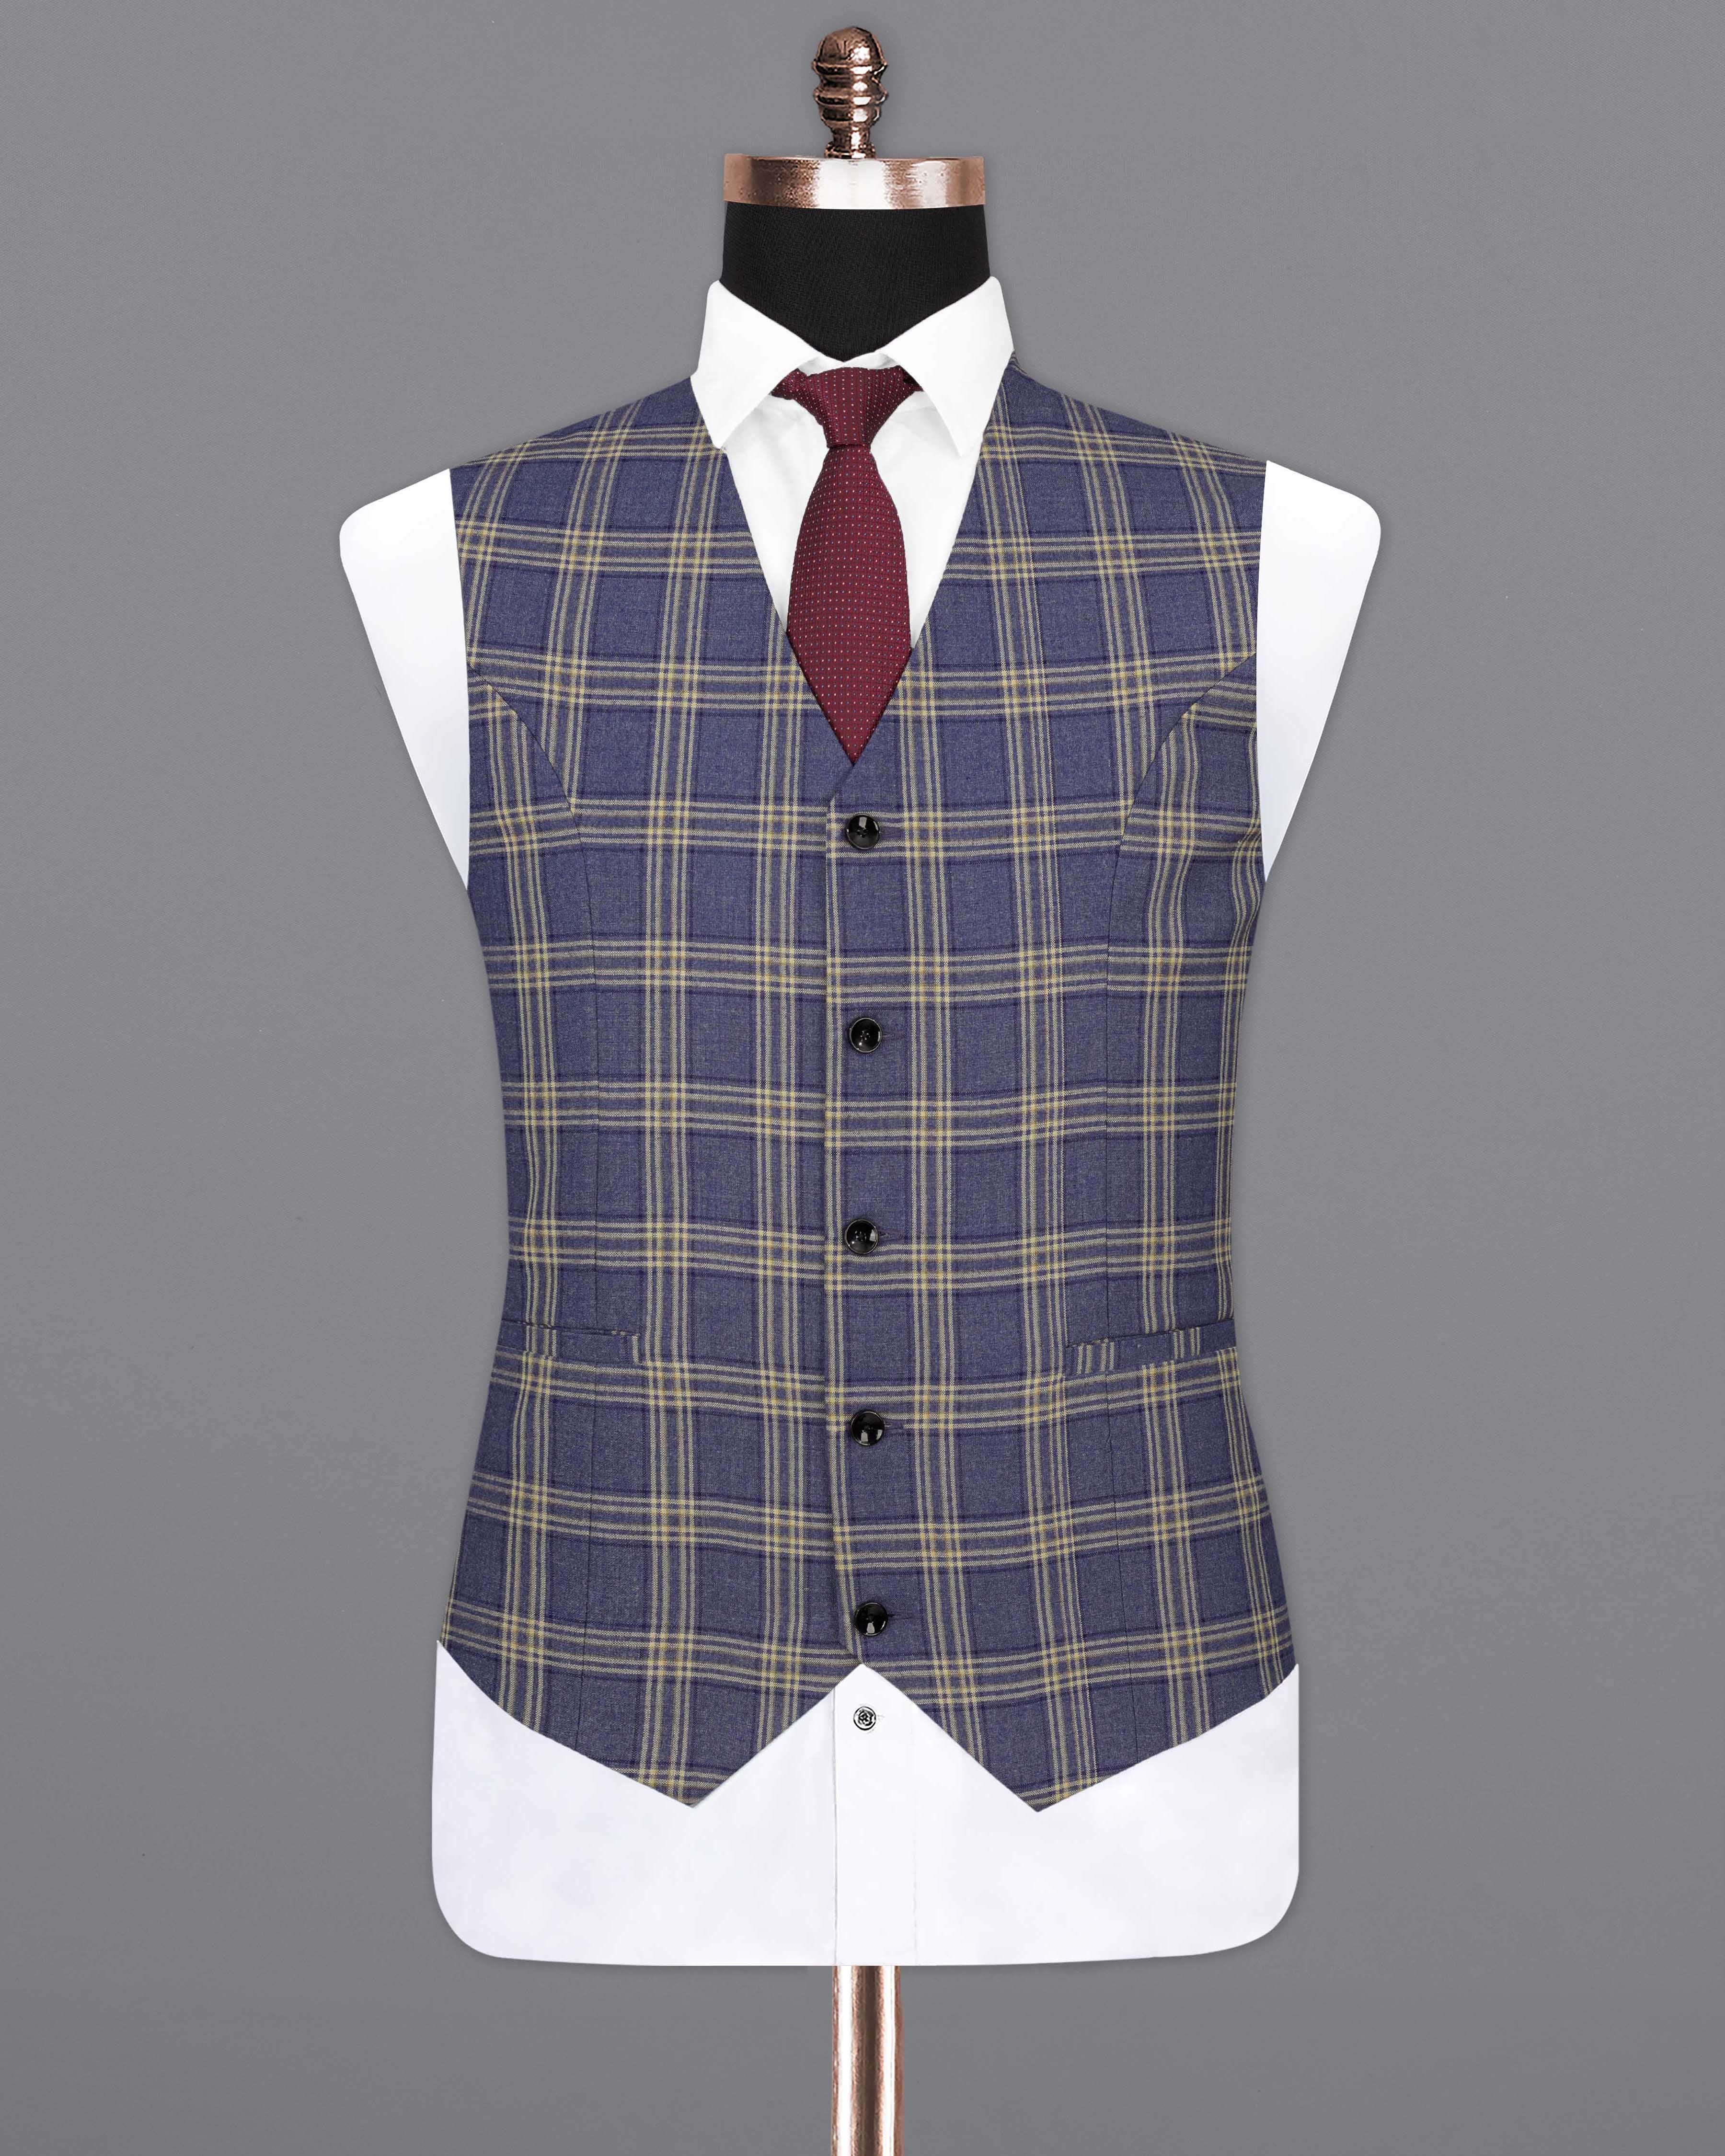 River Bed Blue with Tallow Brown Plaid Waistcoat V2045-36, V2045-38, V2045-40, V2045-42, V2045-44, V2045-46, V2045-48, V2045-50, V2045-52, V2045-54, V2045-56, V2045-58, V2045-60